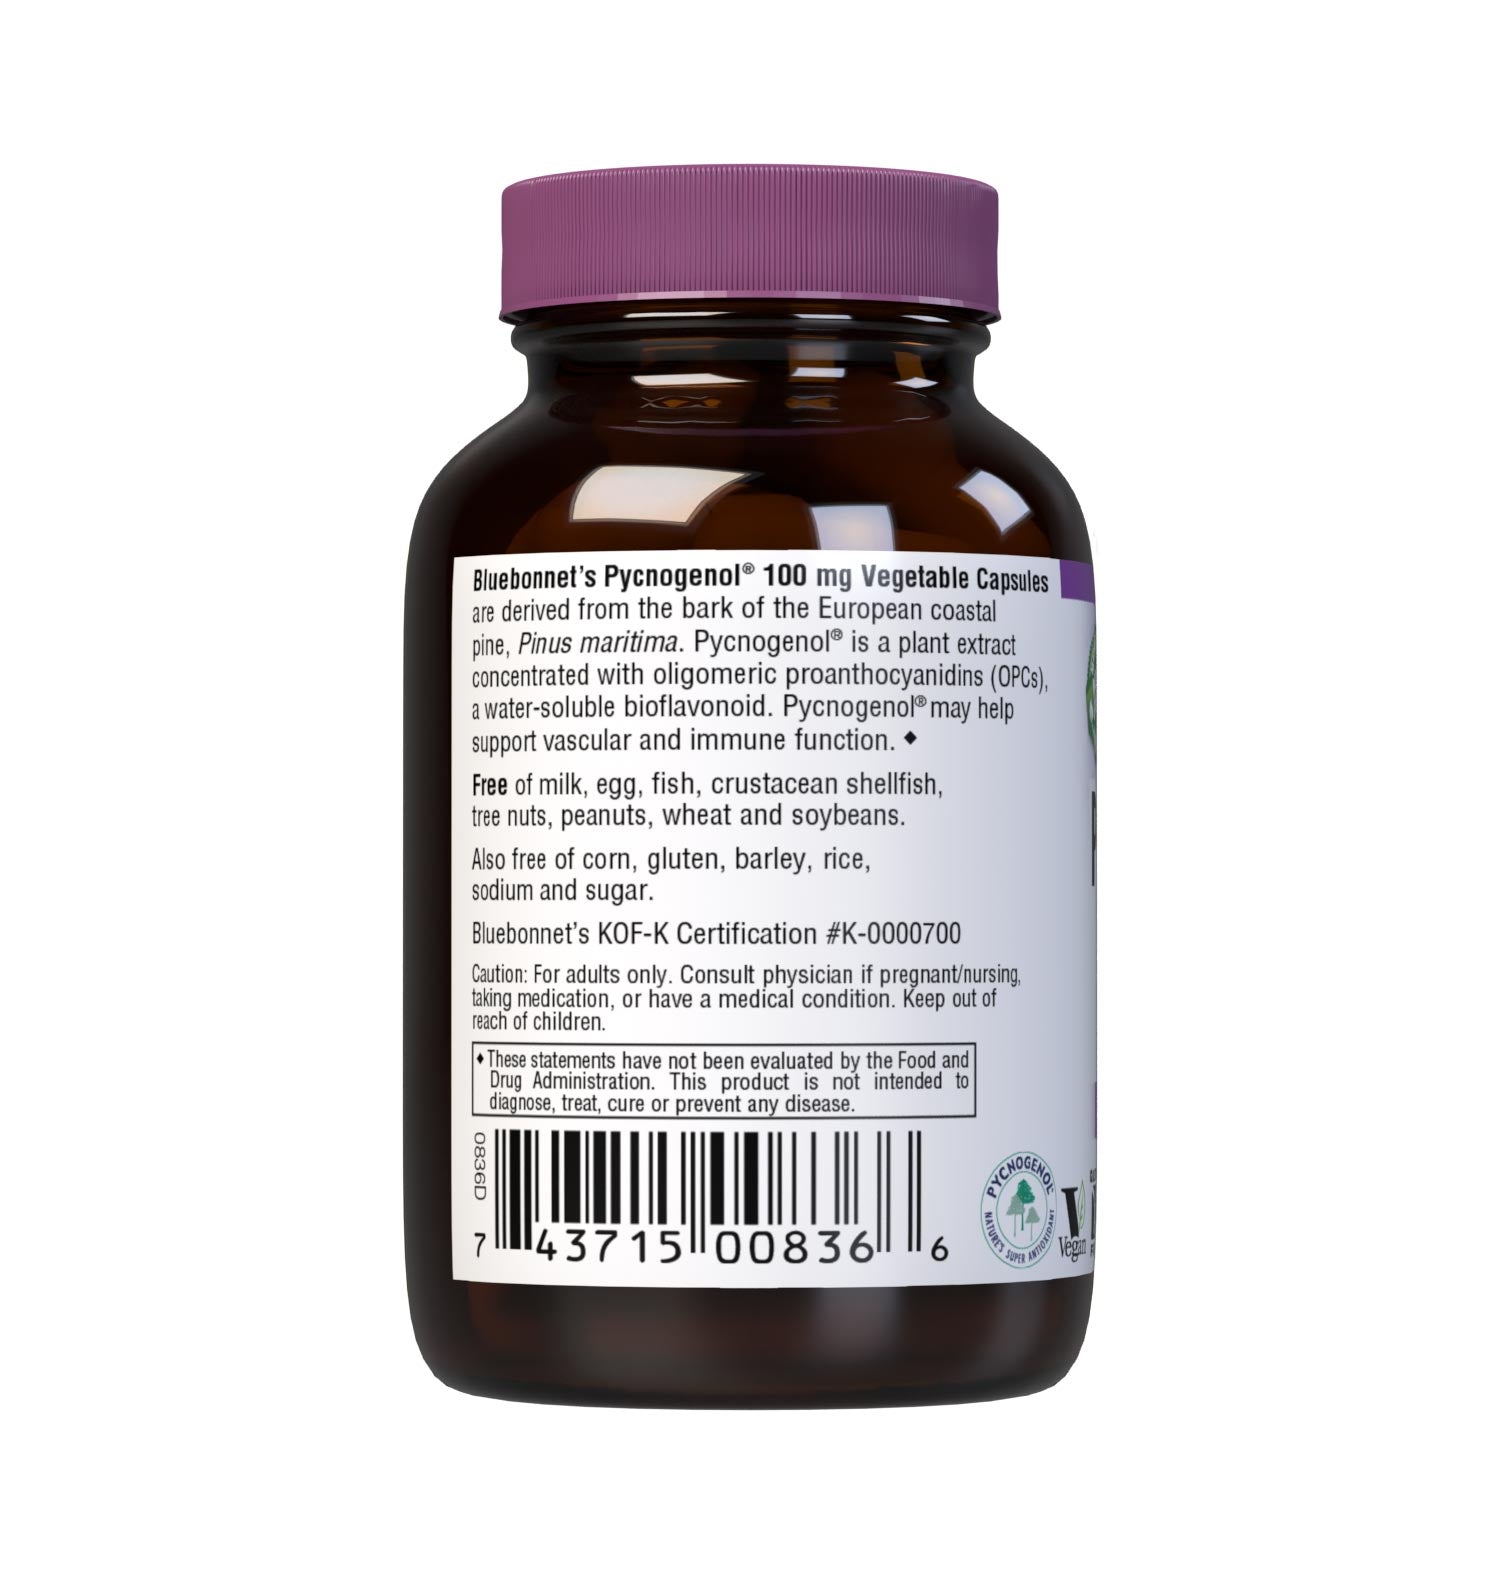 Bluebonnet’s Pycnogenol 100 mg 60 Vegetable Capsules are derived from the bark of the European coastal pine, Pinus maritima. Pycnogenol is a plant extract concentrated with oligomeric proanthocyanidins (OPCs), a water-soluble bioflavonoid. Pycnogenol may help support vascular and immune function. Description panel. #size_60 count